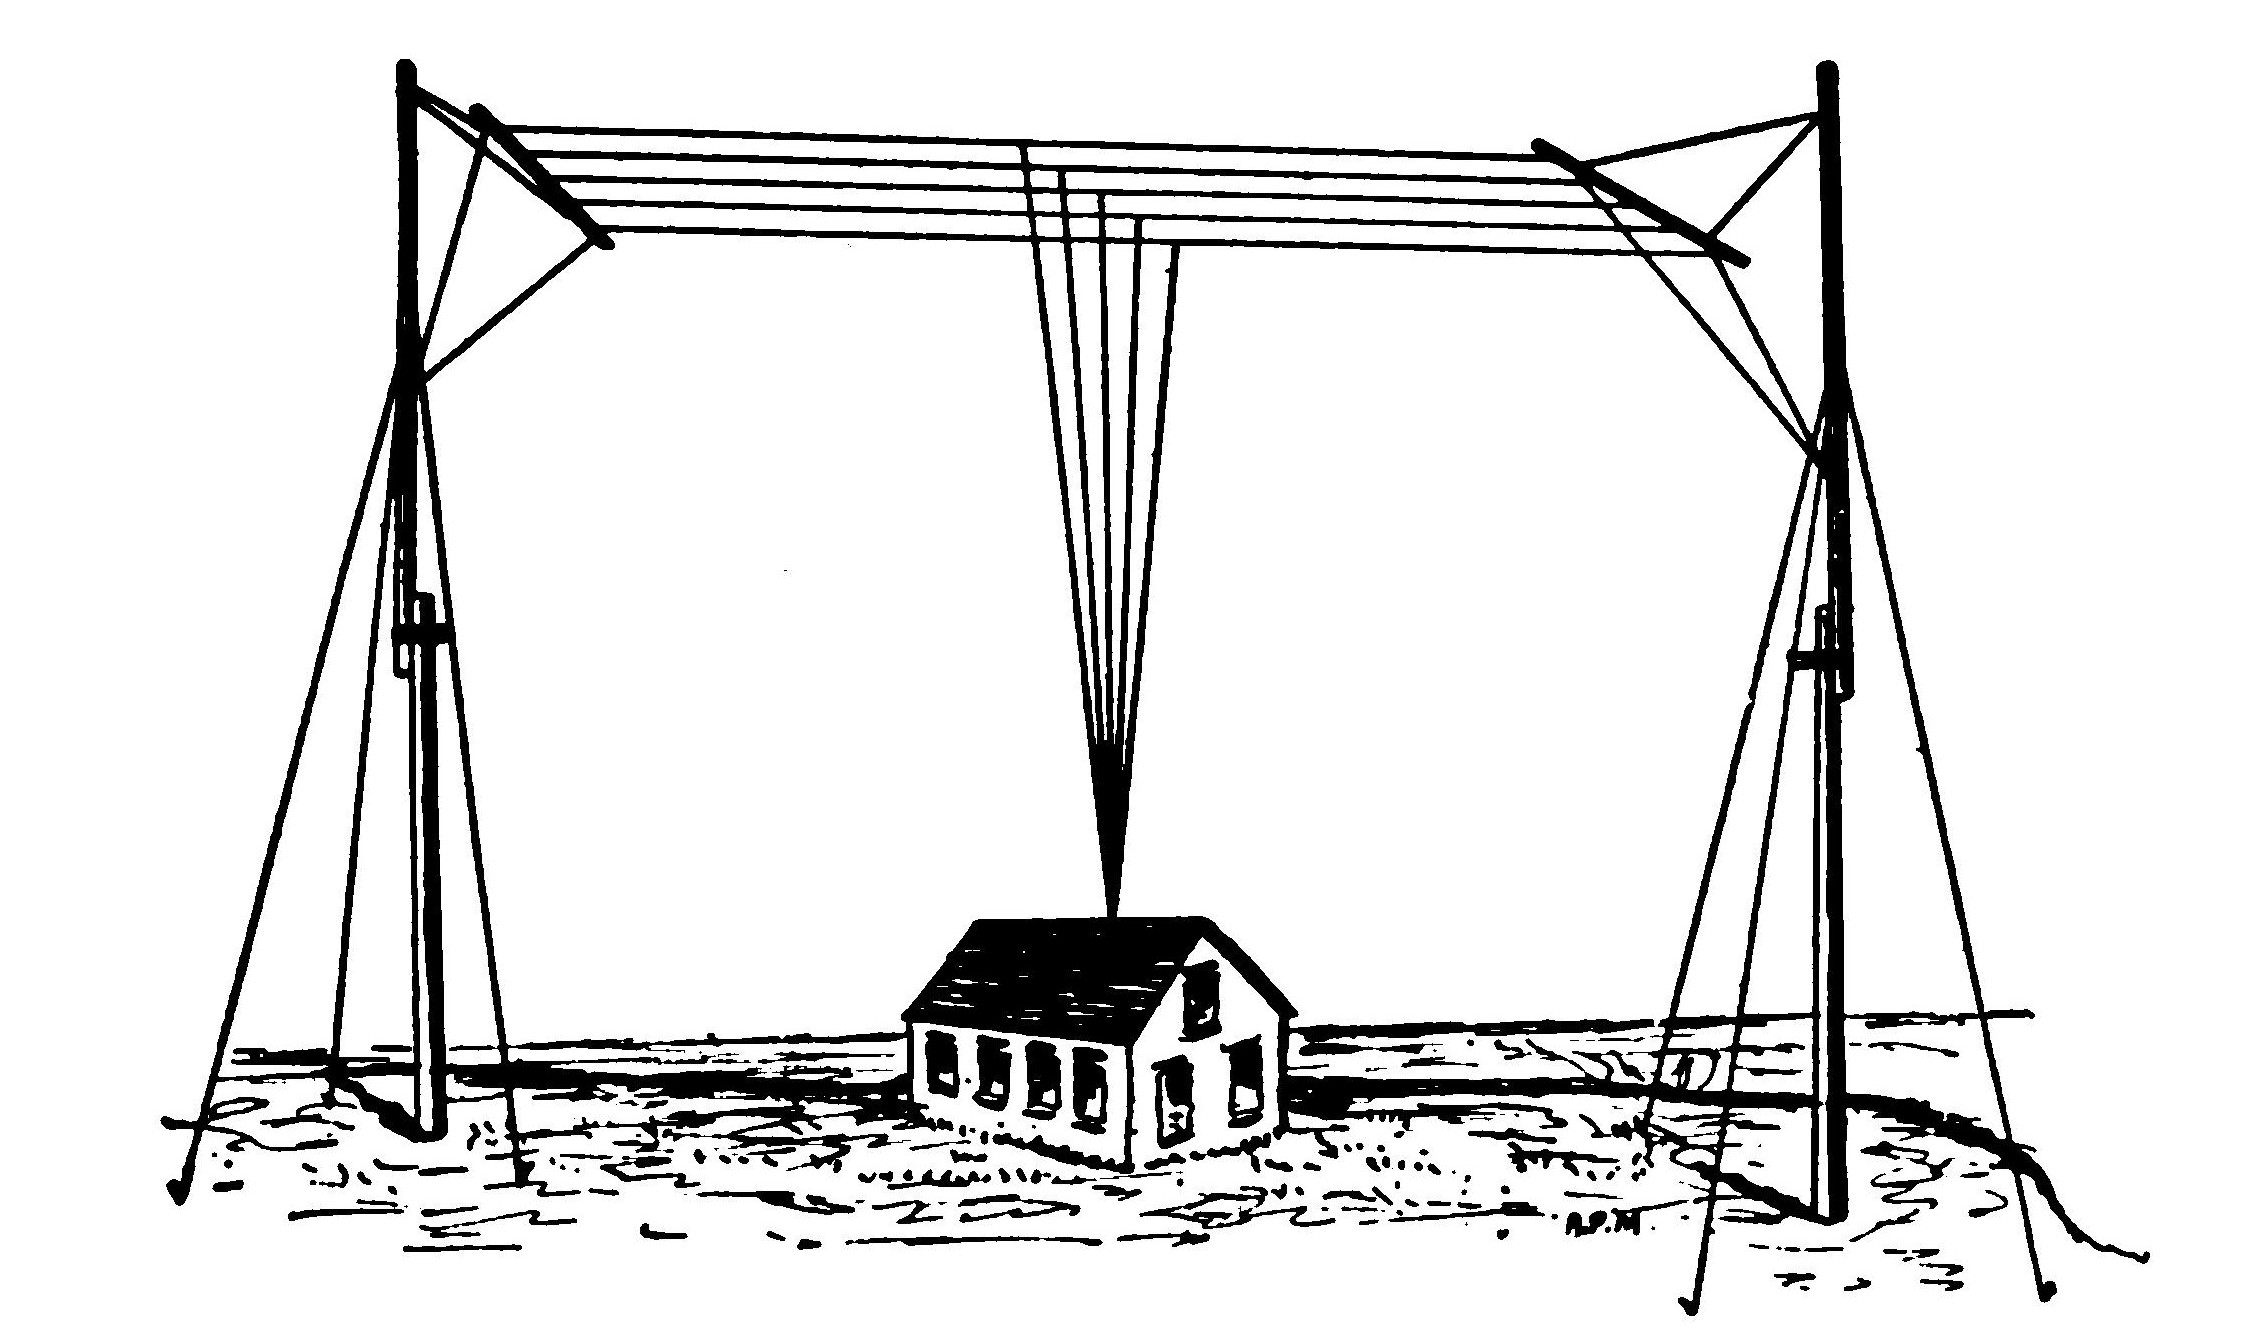 FIG. 19.—A diagram showing the arrangement of a "T" aerial.